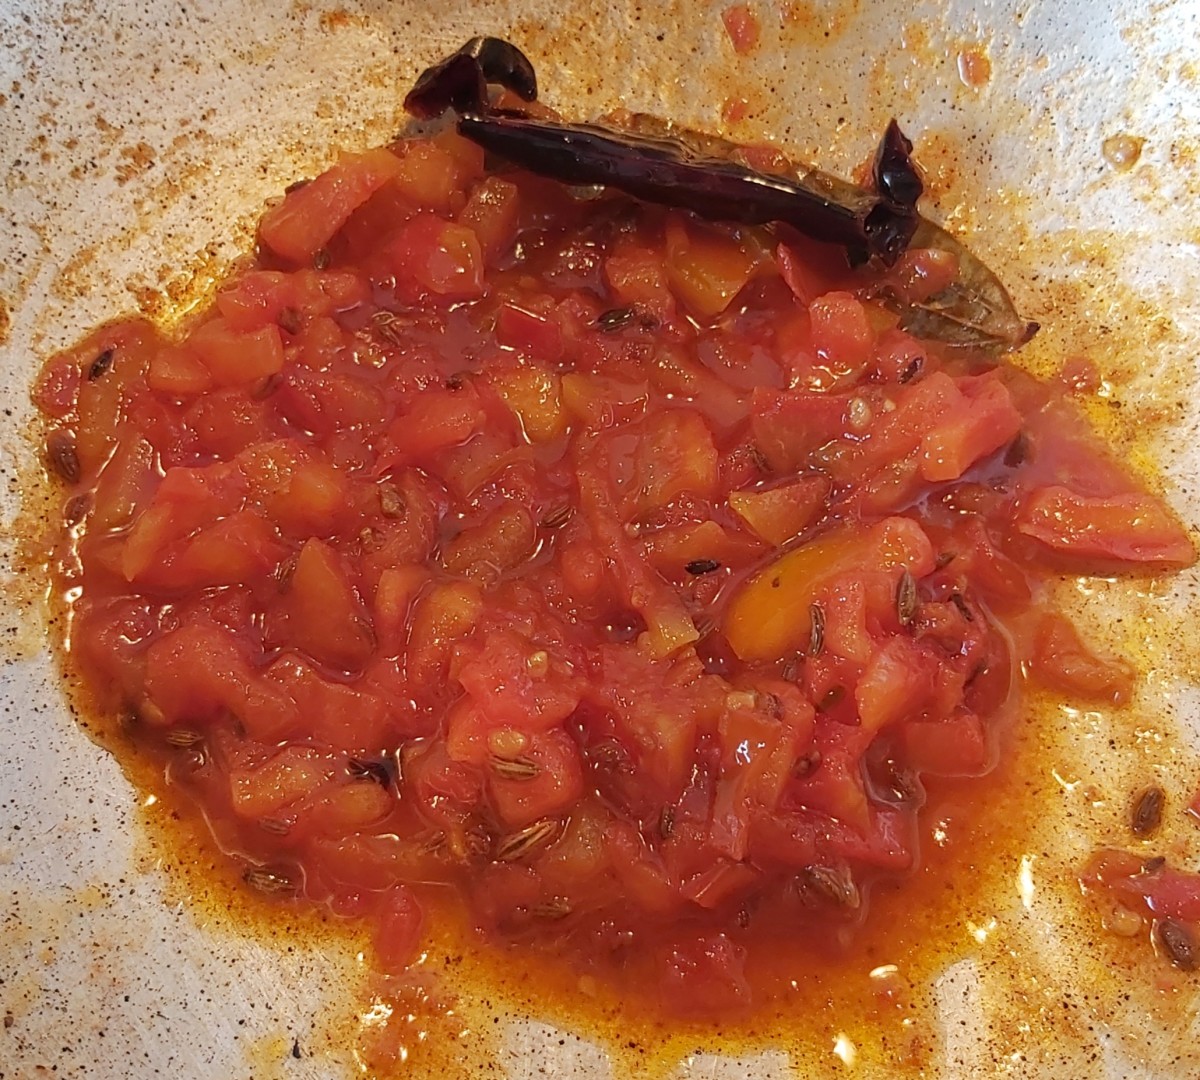 Mix everything and continue cooking till the tomatoes become tender and the chutney reaches the desired consistency. Adjust salt, jaggery and vinegar if required. Turn off the heat.